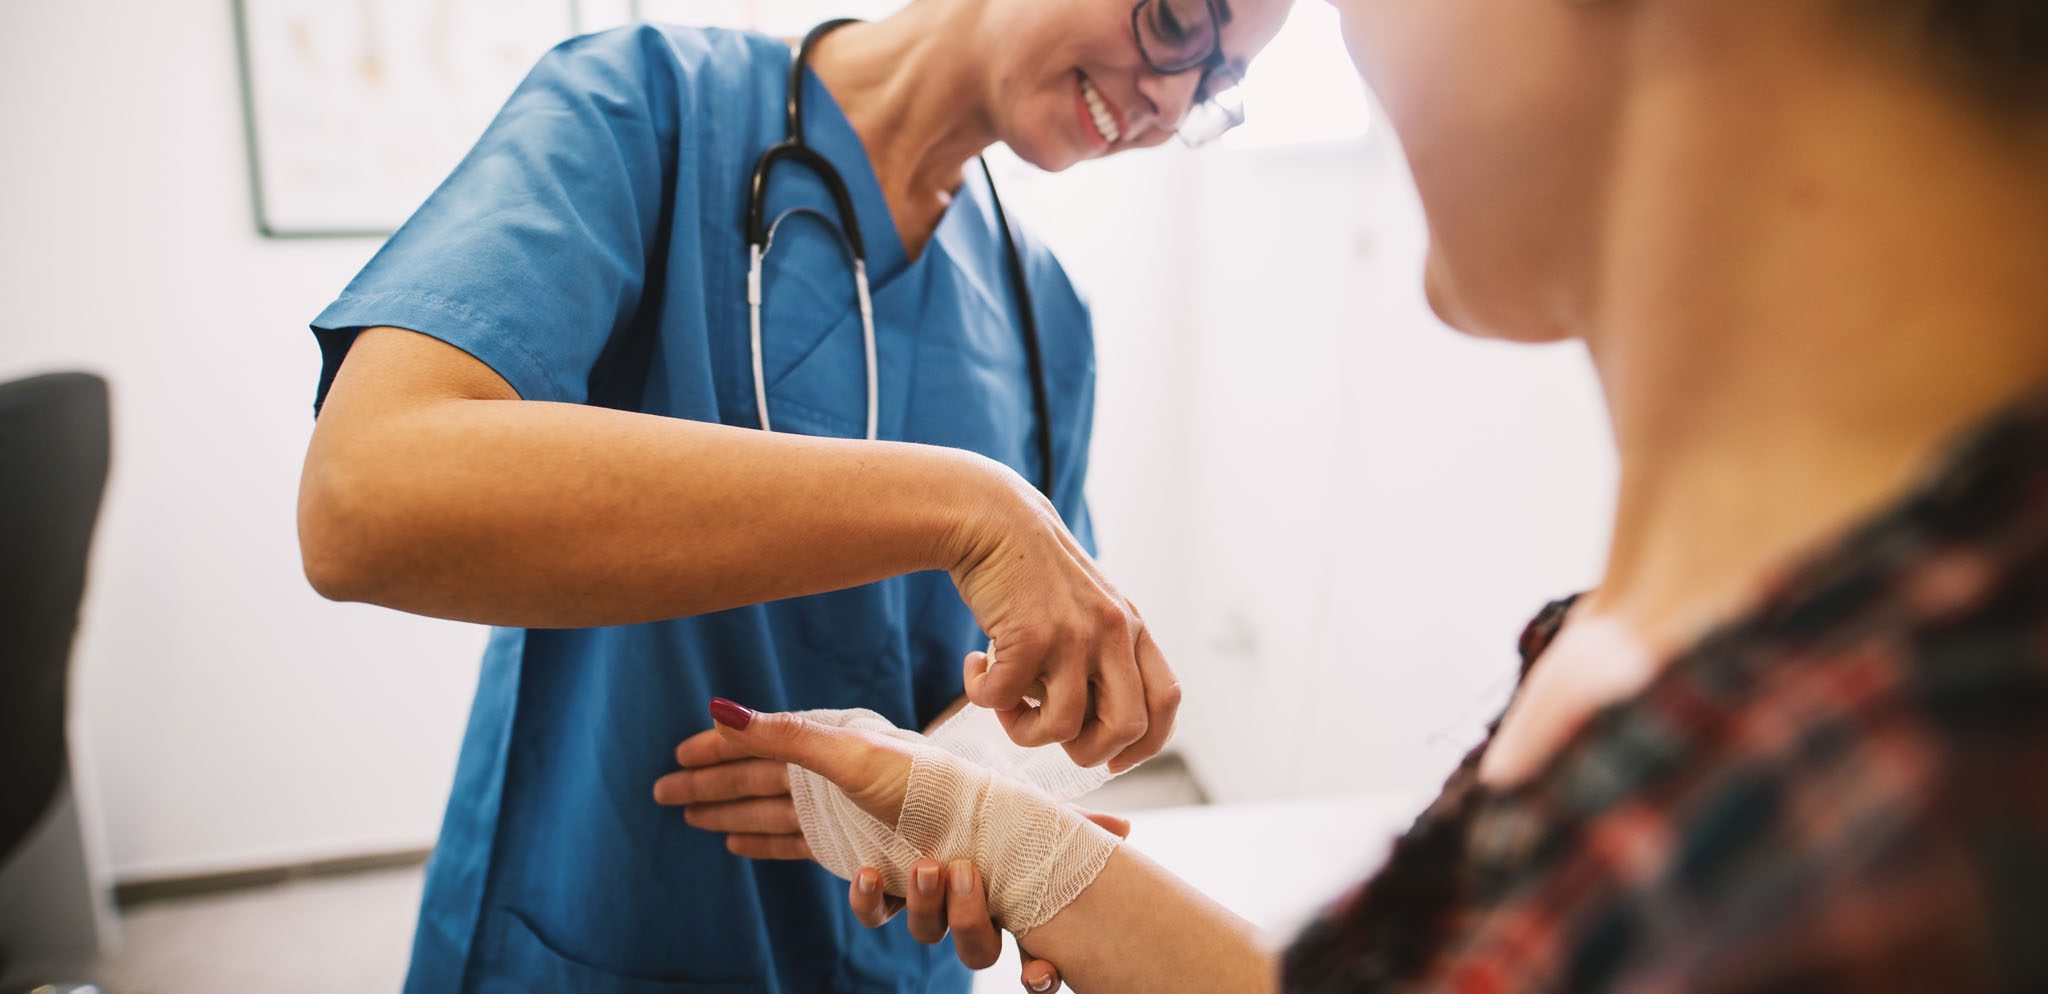 Smiling nurse placing a bandage on the wrist of a patient.